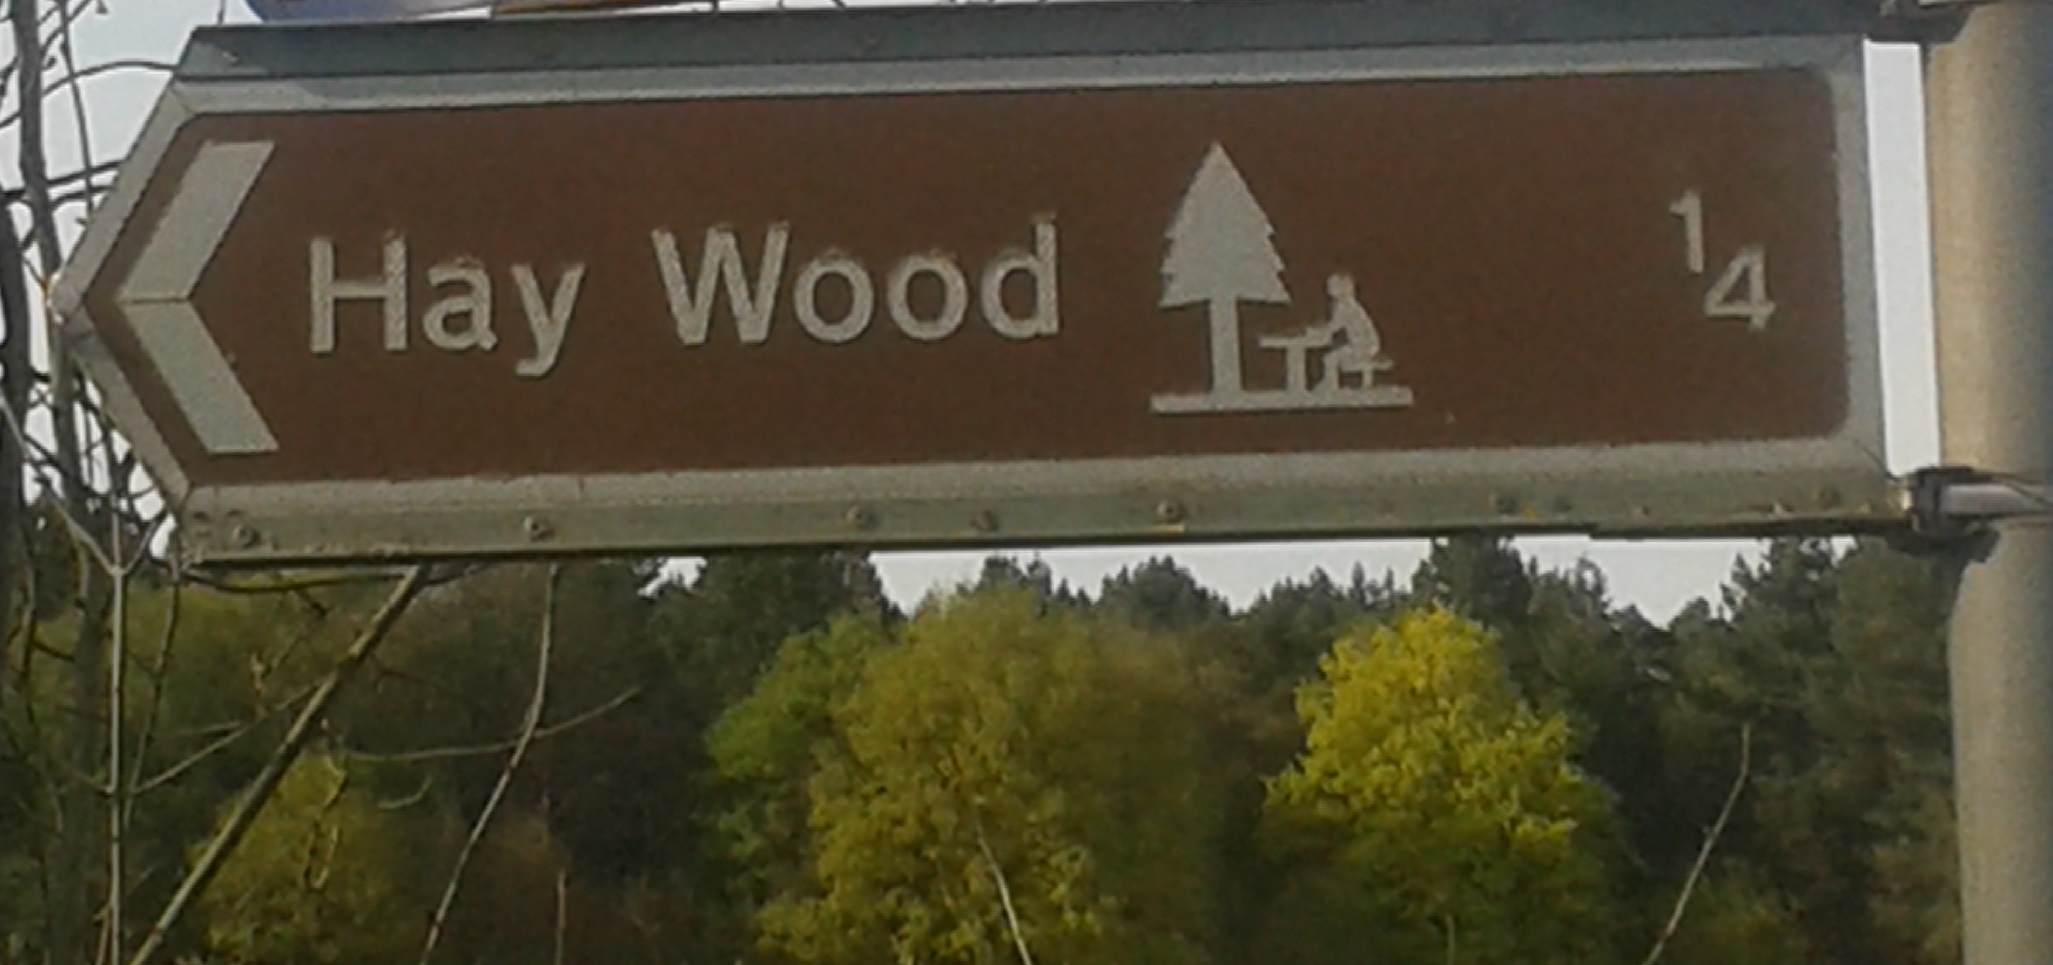 Yes, we know it's spelled 'Heywood', but given the title of the article, we couldn't not use this picture!